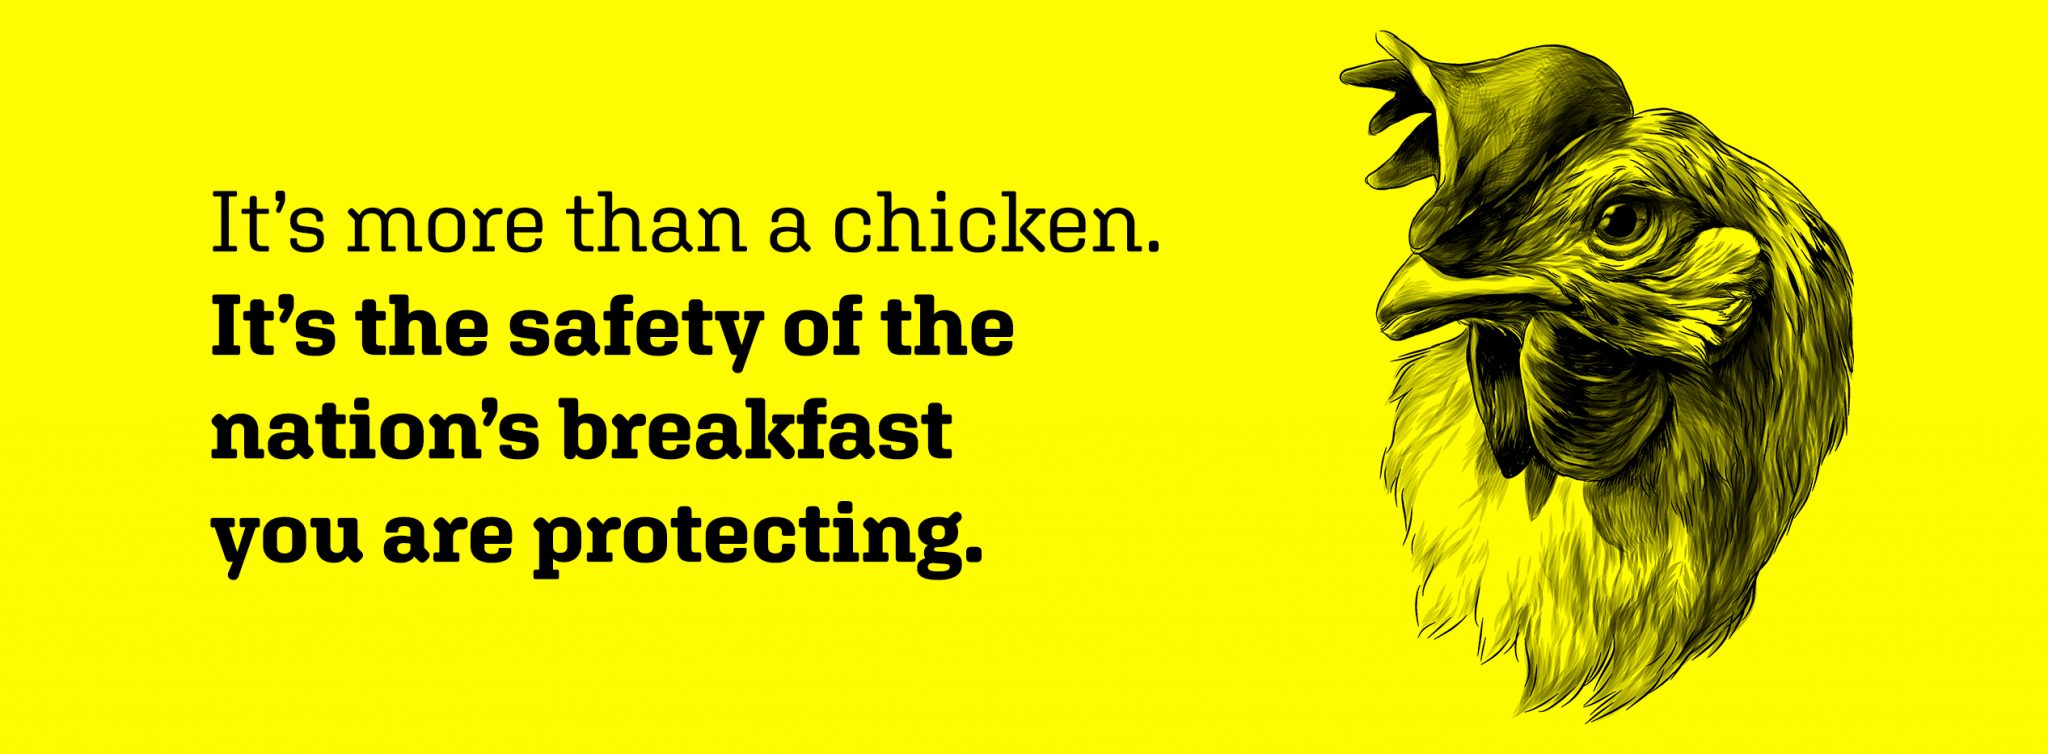 It'd more than a chicken. It's the safety of the nation's breakfast you are protecting.